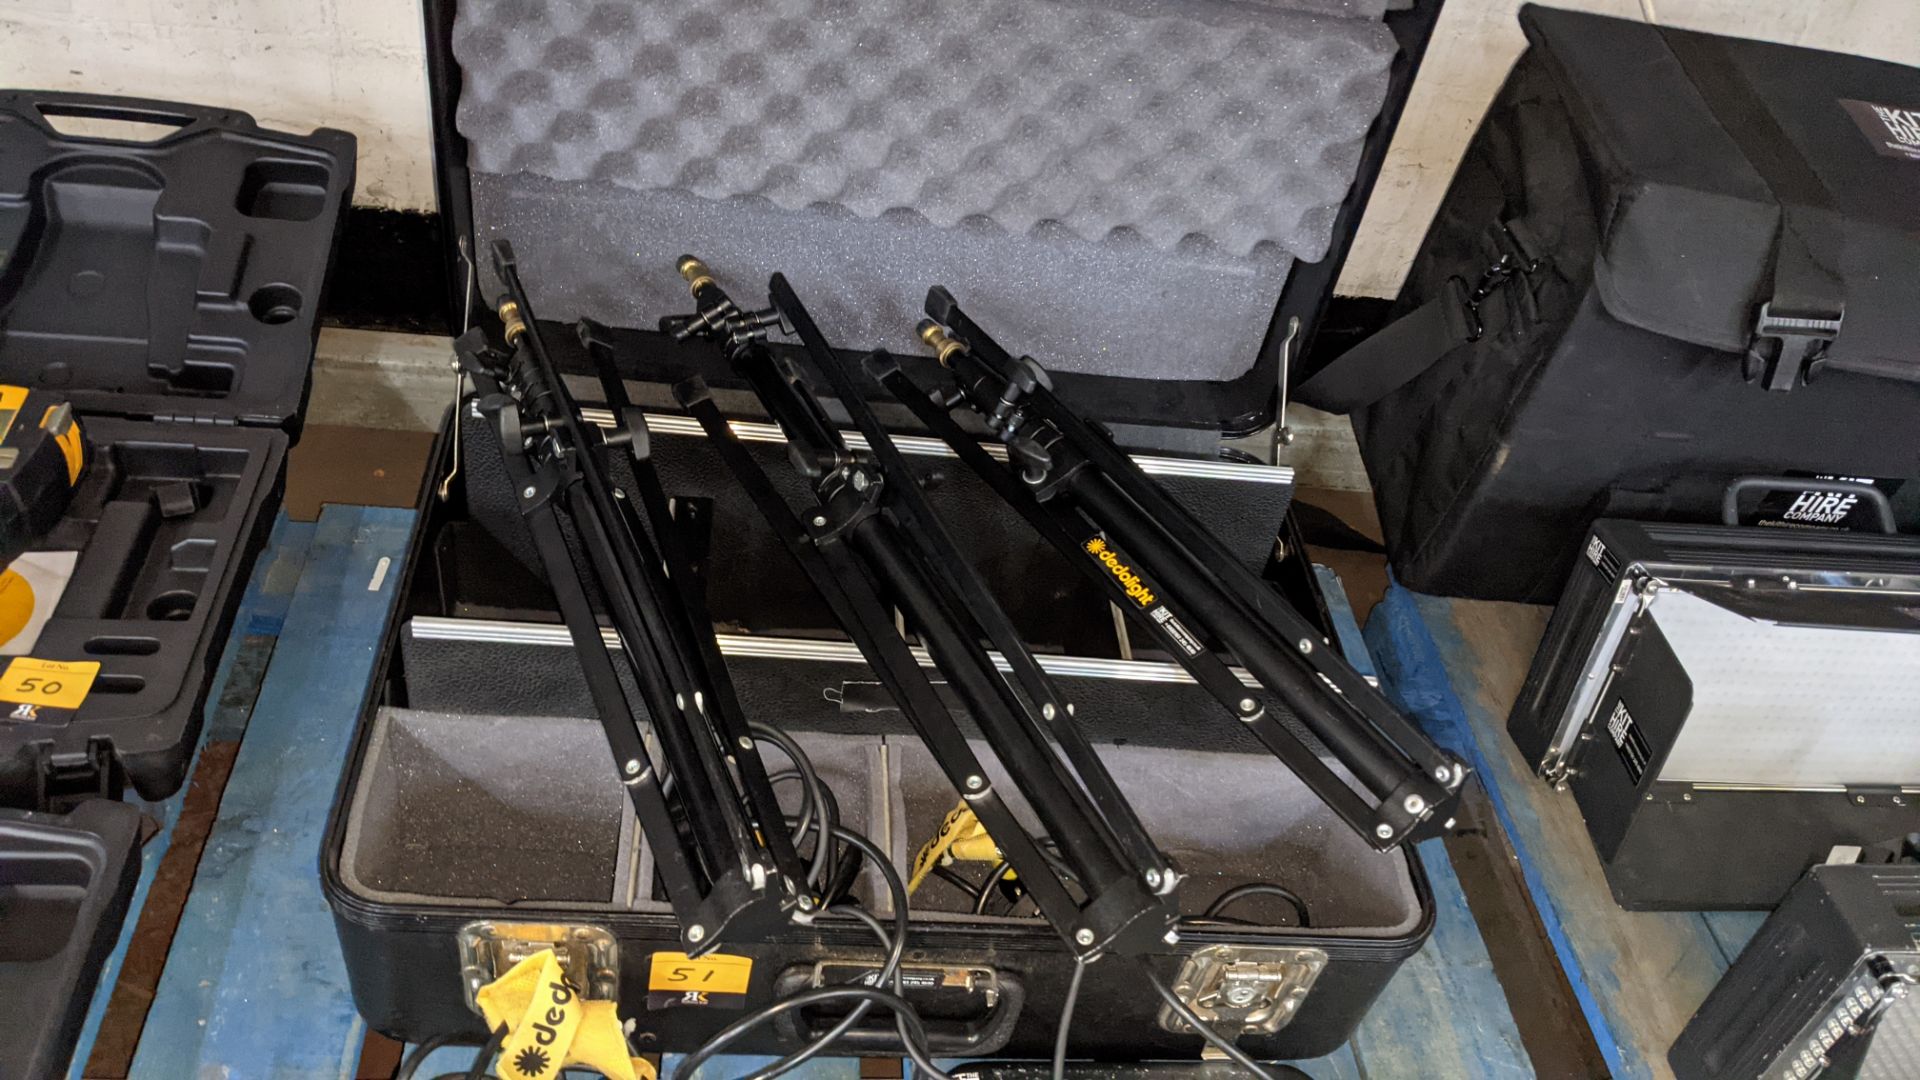 Dedolight lighting system comprising 3 tripods, 3 lamps, 3 powerpacks/controllers & heavy-duty case - Image 10 of 13